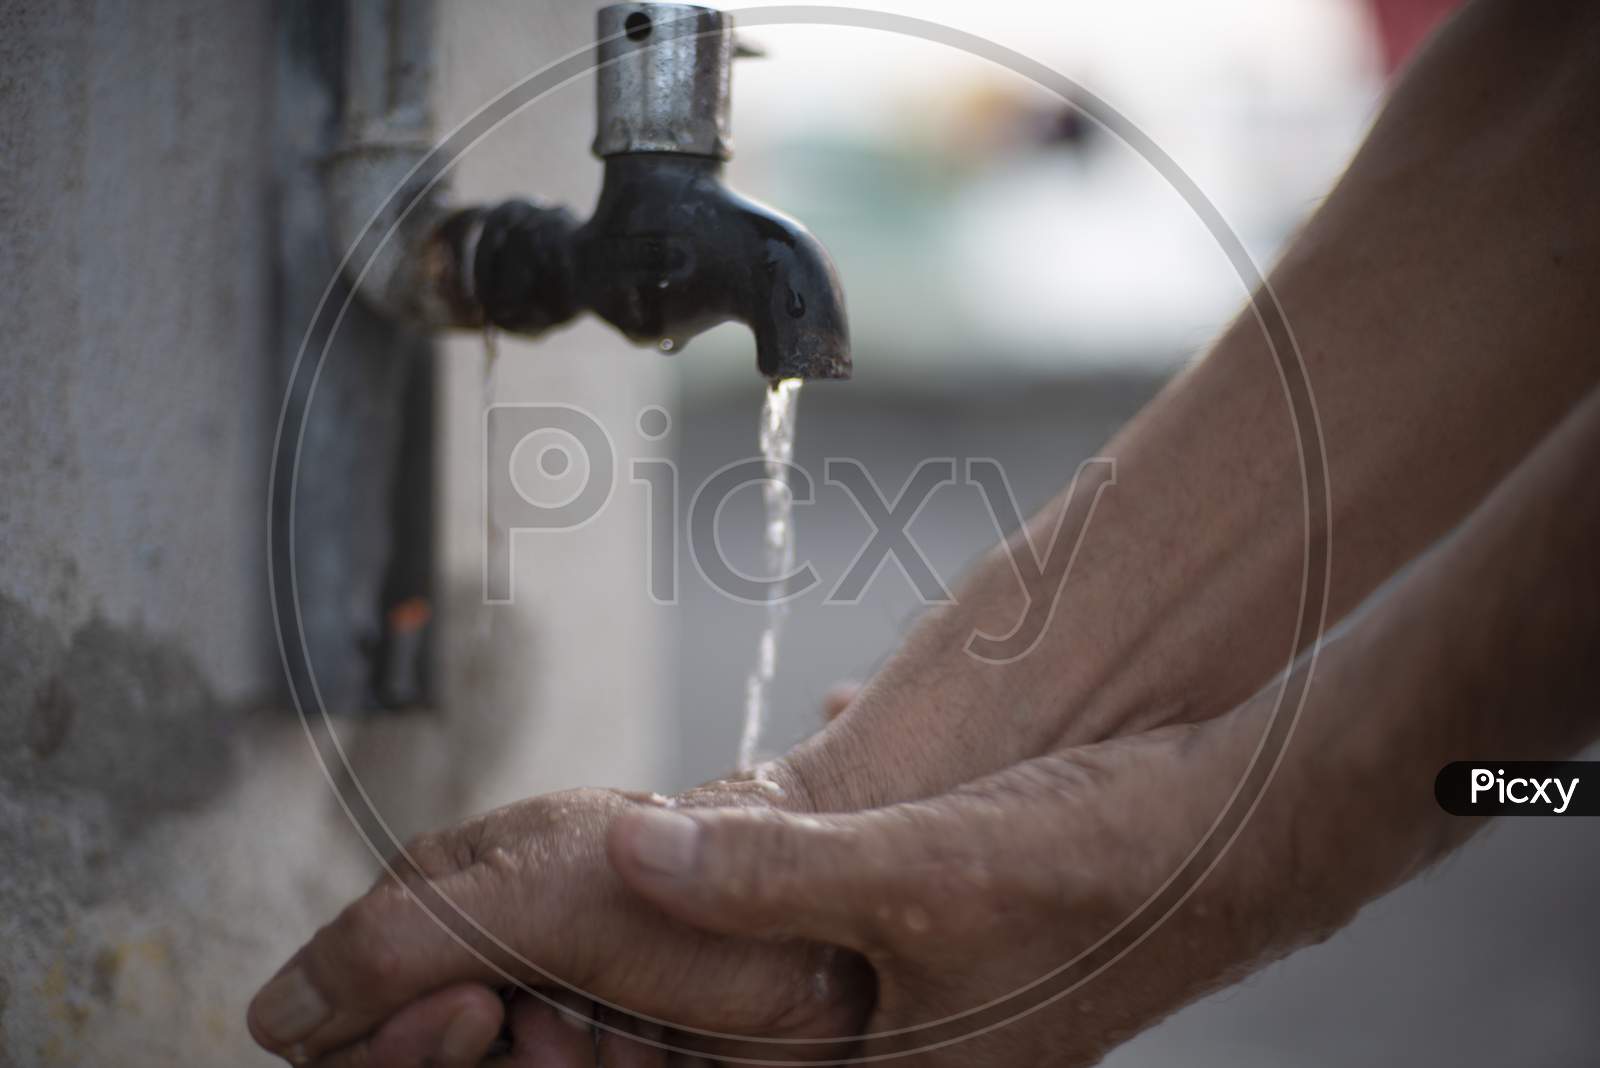 A person washing hands in tap water using sanitizer to prevent corona virus. Indian lifestyle, covid 19, pandemic